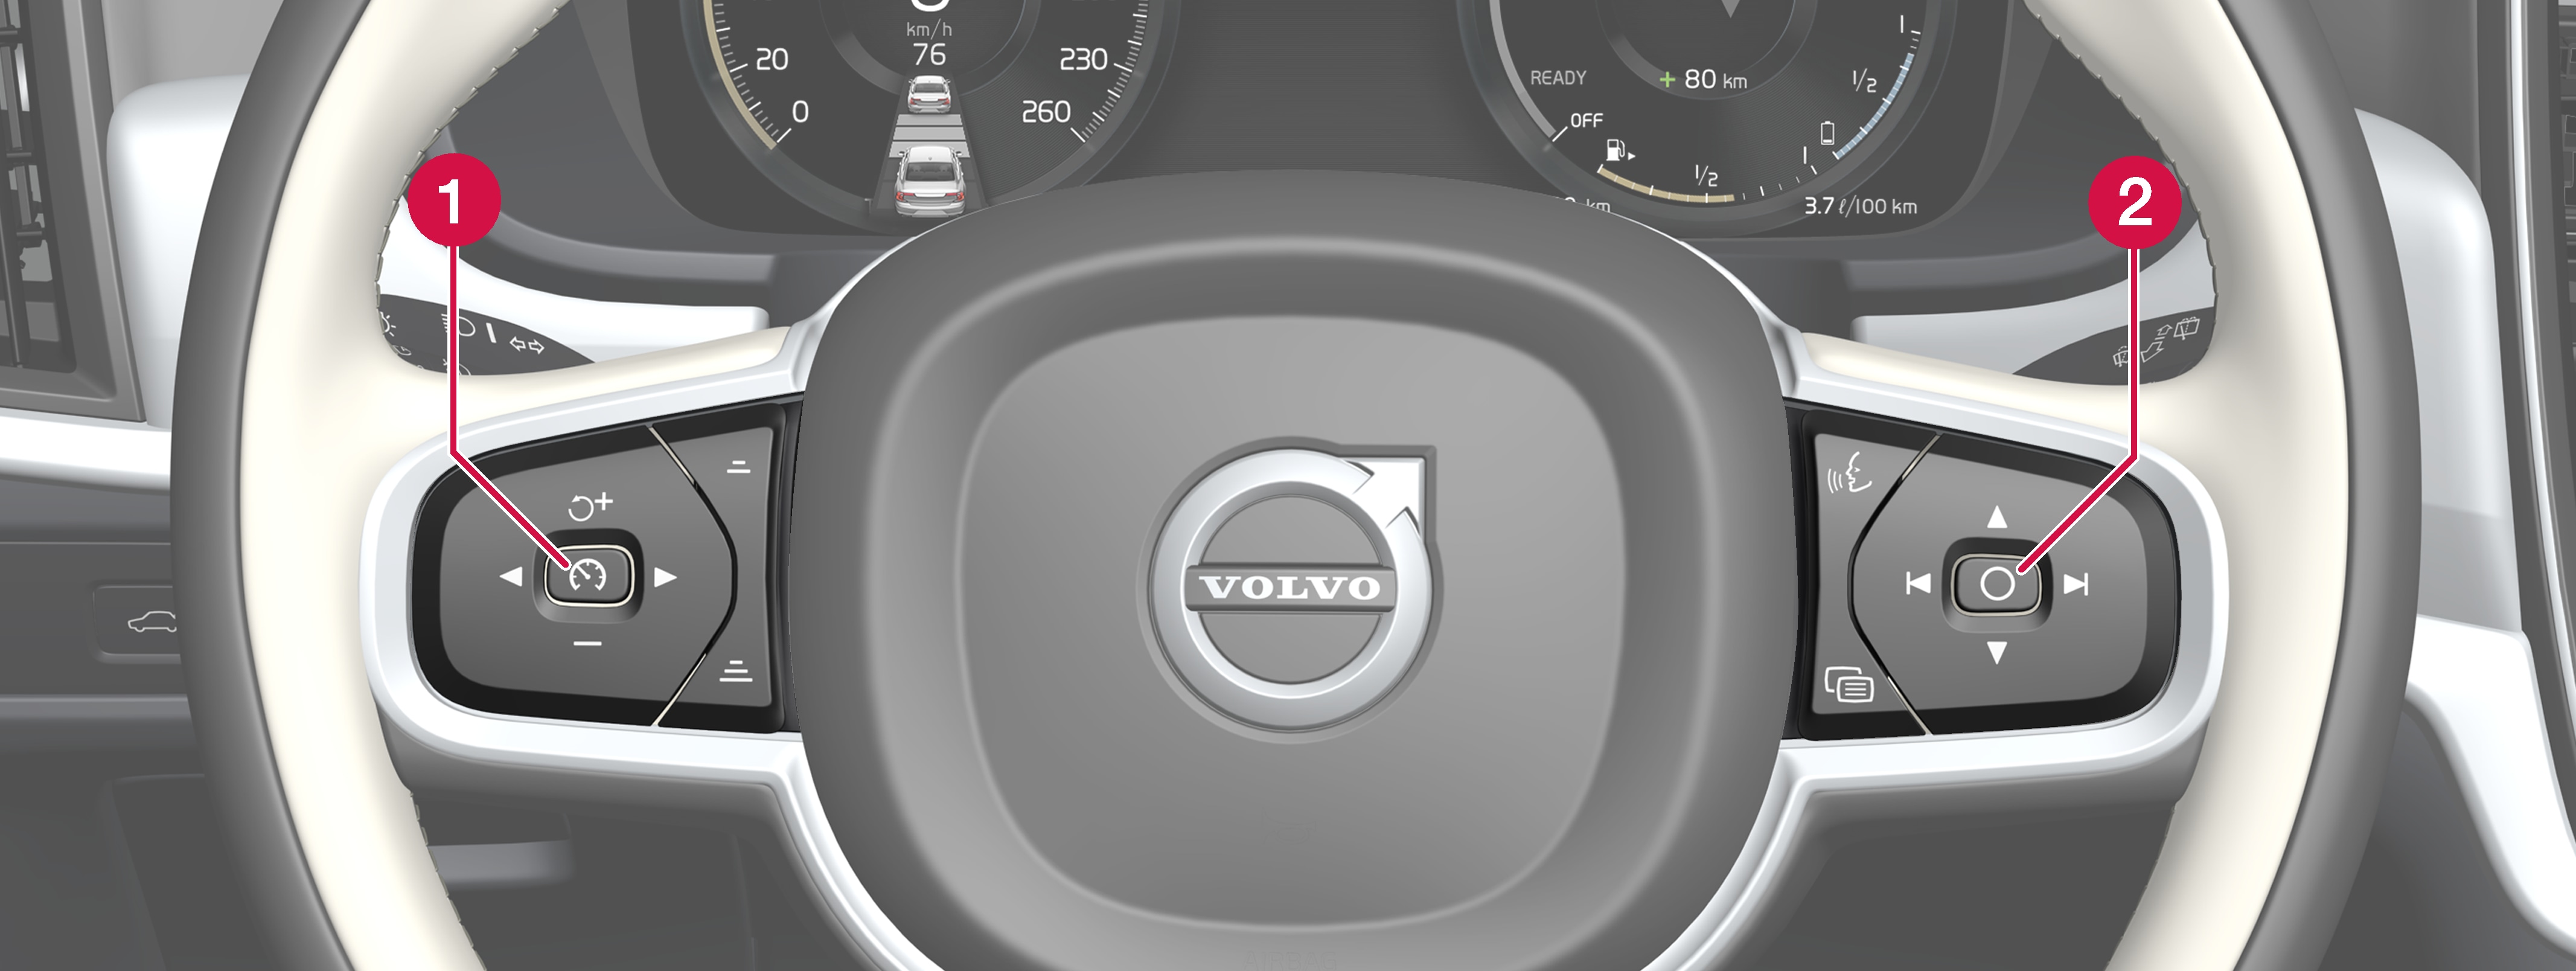 P5-1817-S90-V90-Steering wheel with numbering